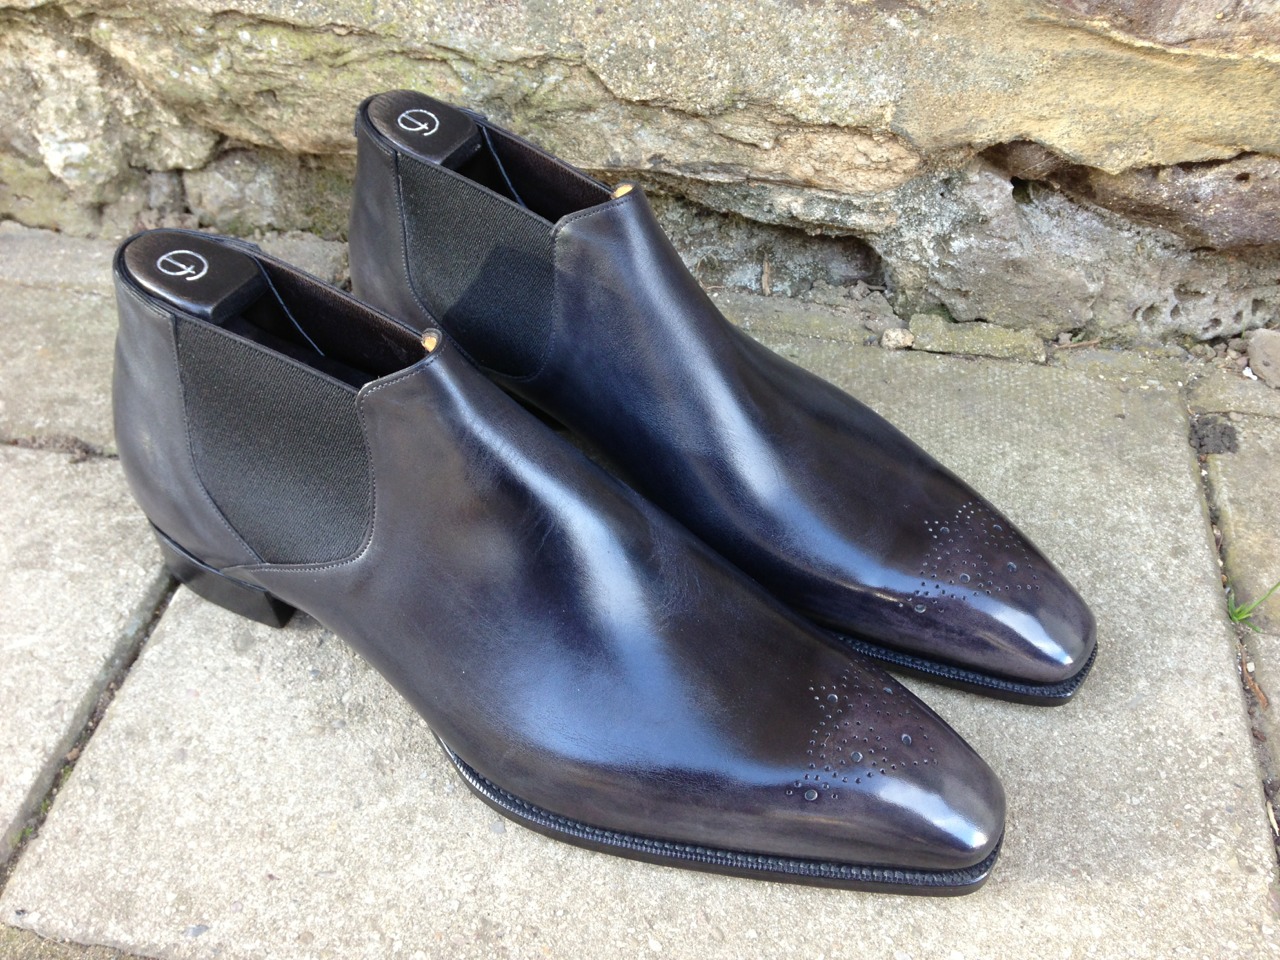 The Shoe AristoCat: Gaziano and Girling - Chelsea boot (Deco - Fairbanks)